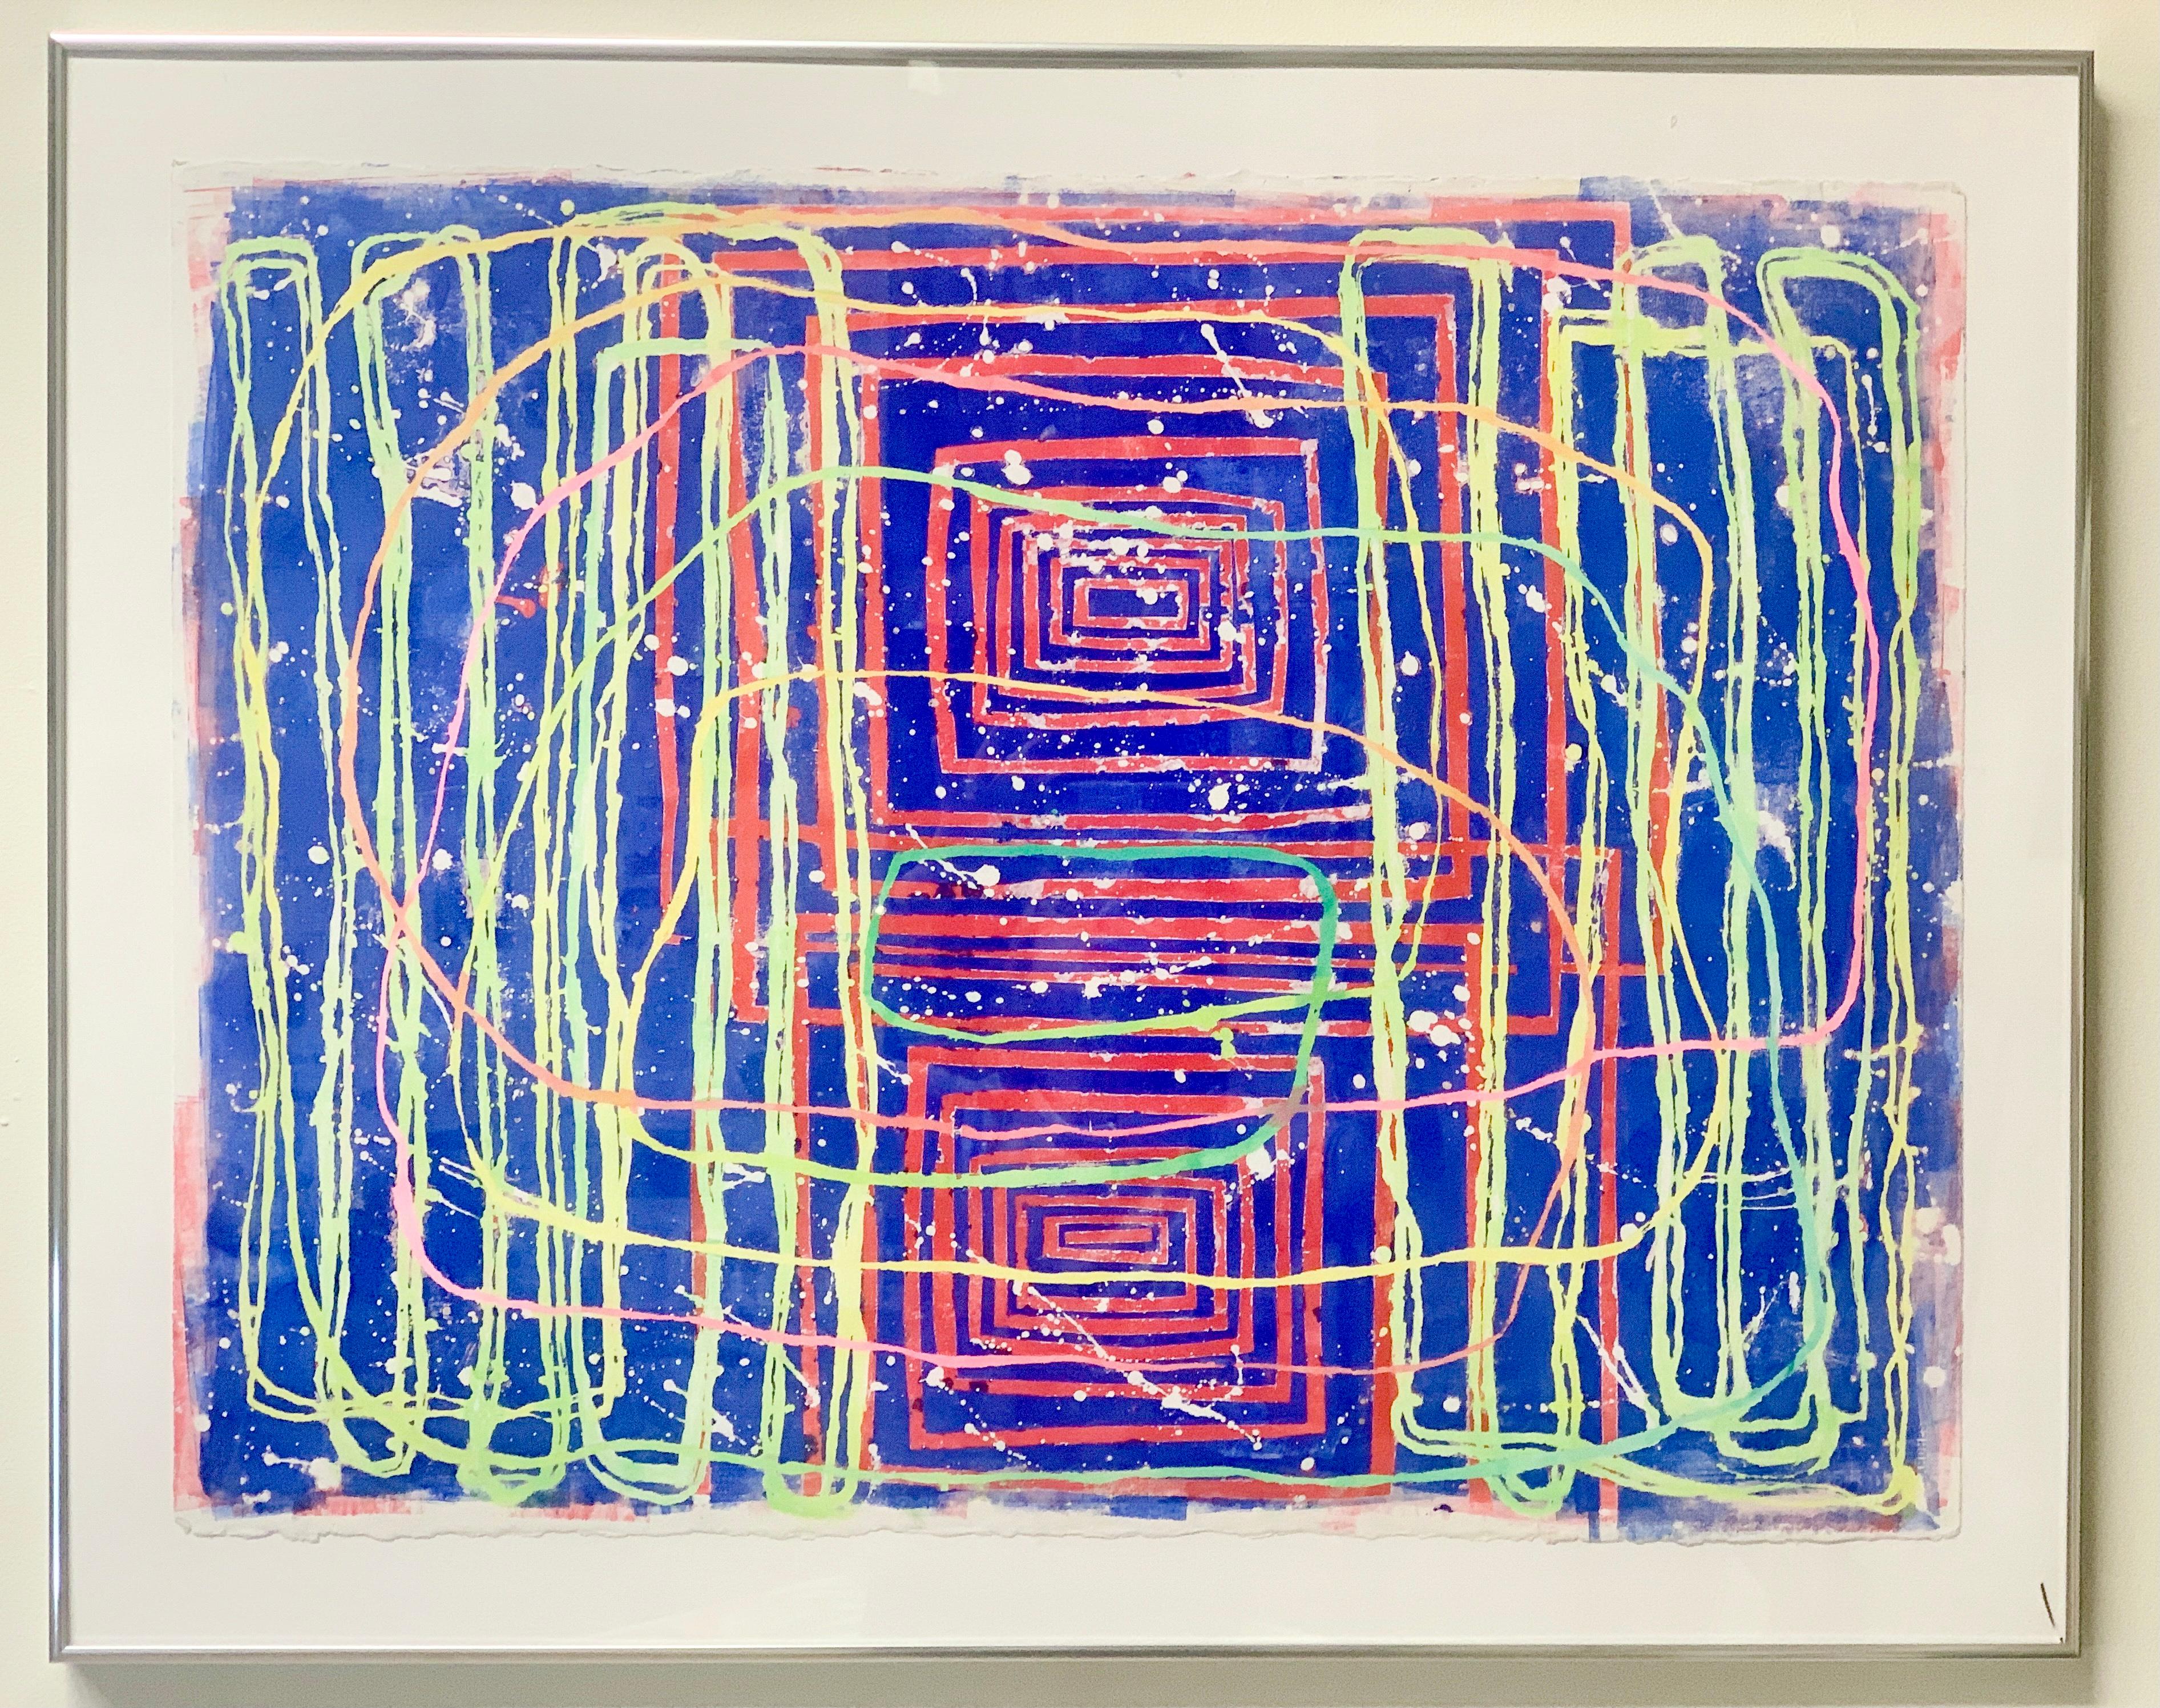 0105: contemporary abstract gestural painting w/ green, red & pink lines on blue - Abstract Art by Paula Cahill